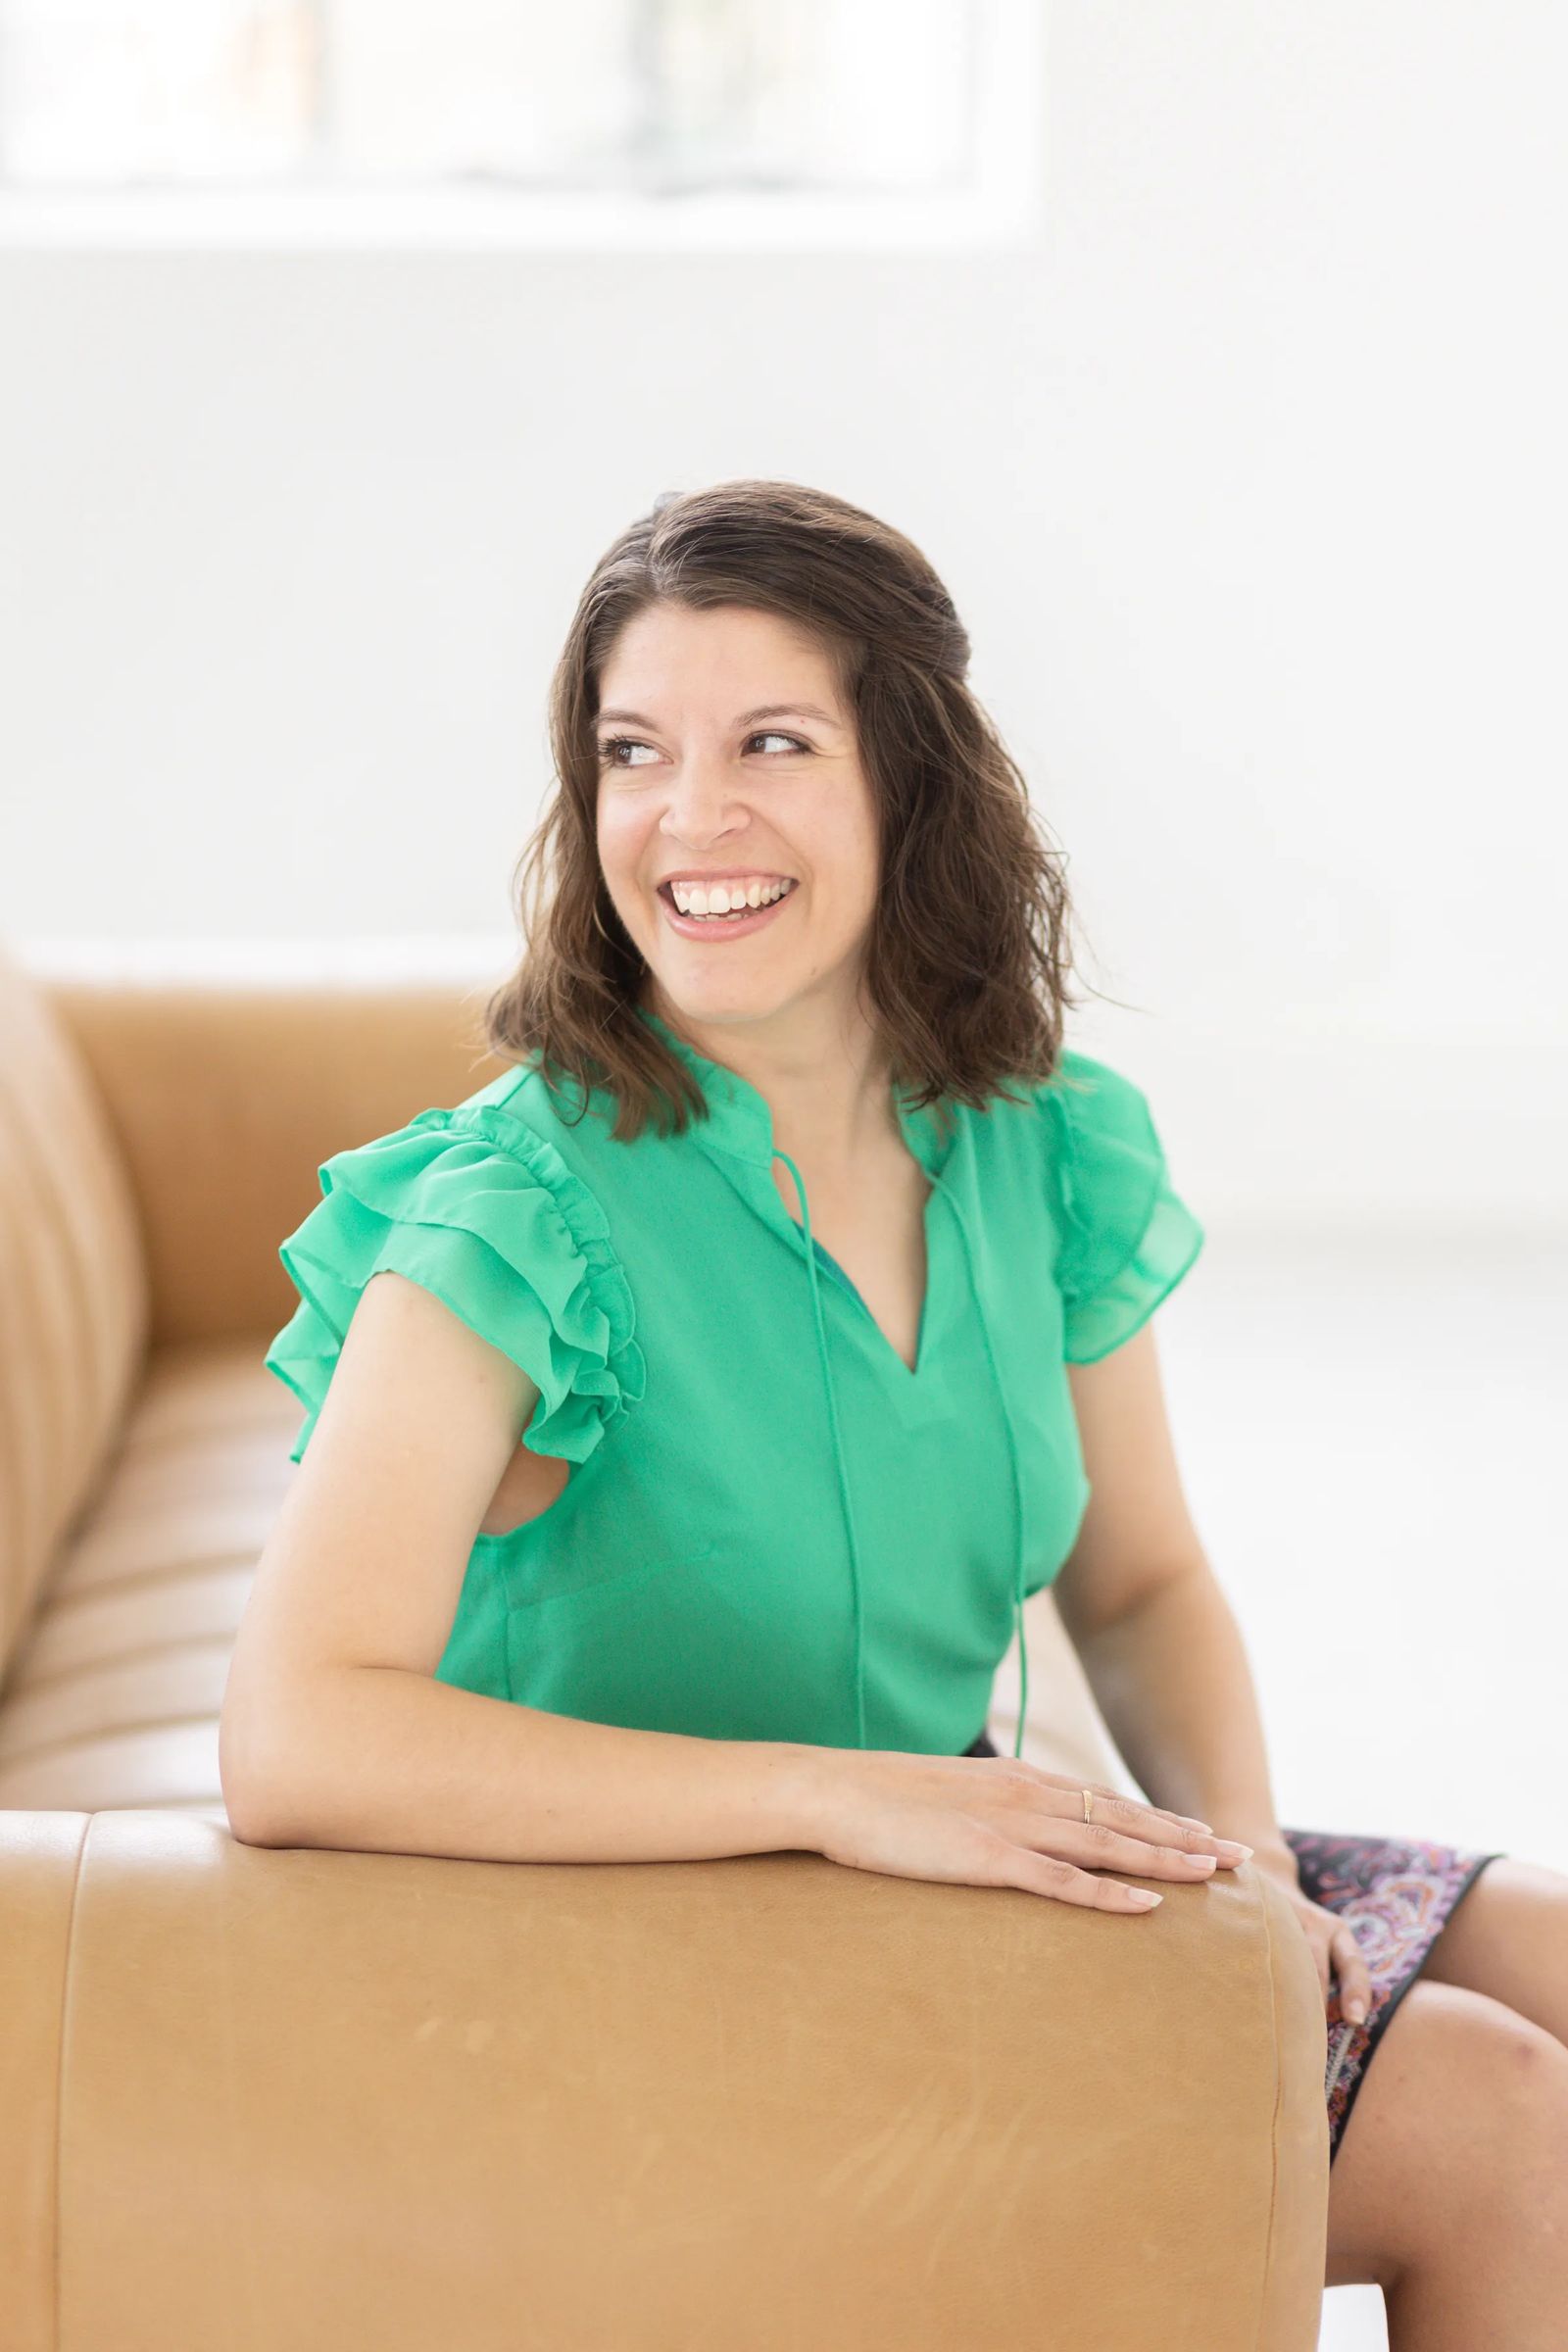 Smiling female looking to the side while sitting on a light brown couch. She is wearing a green top, has short brown hair.